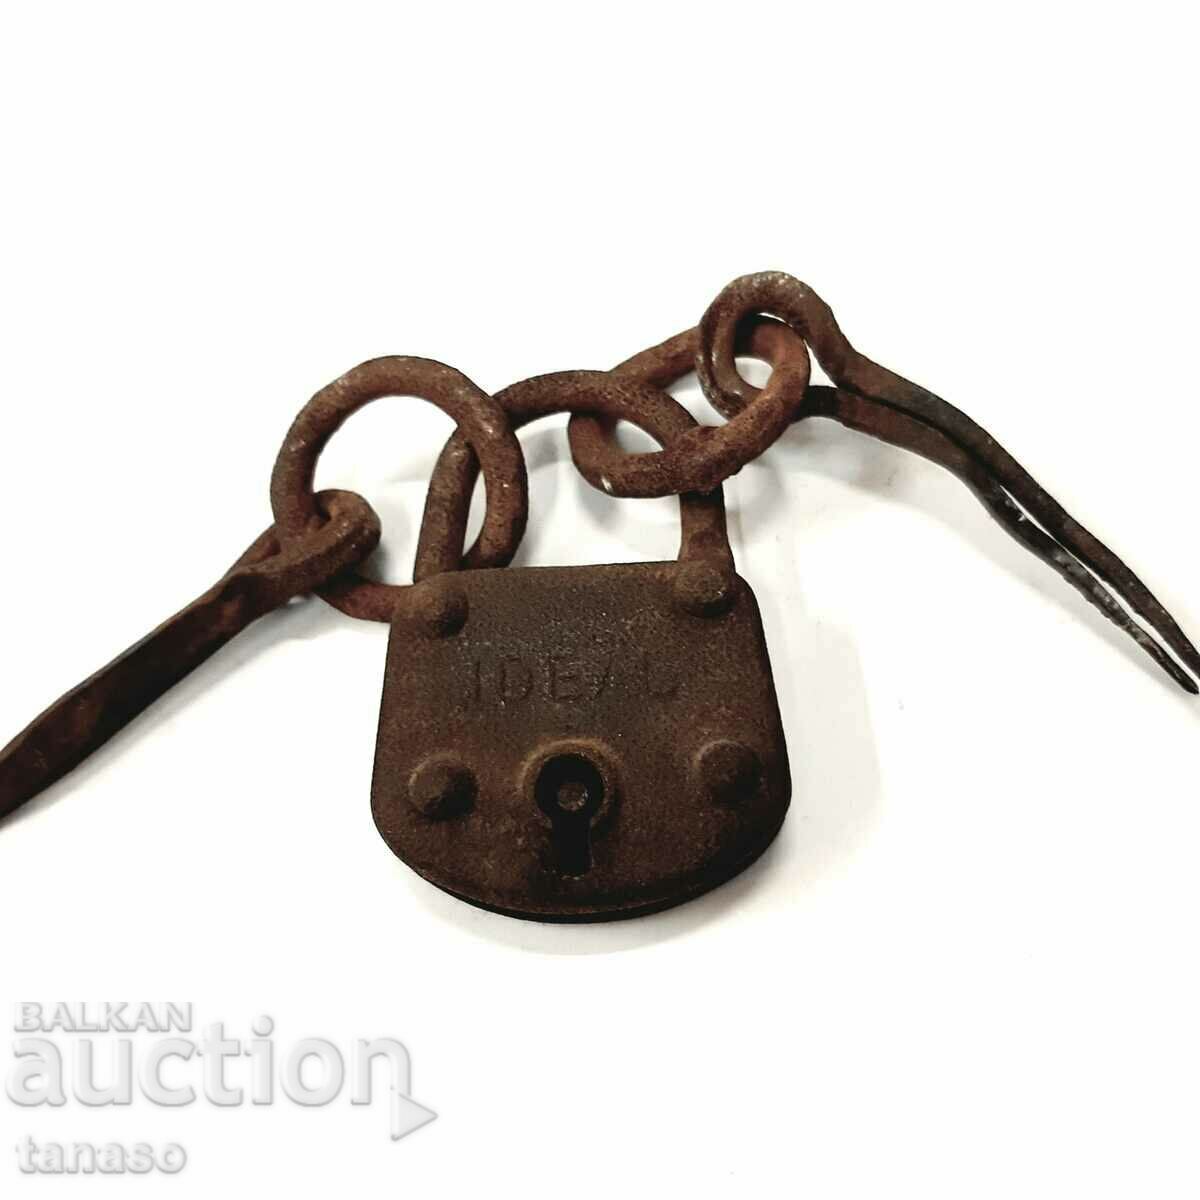 Old padlock with rings and hooks(1.6)